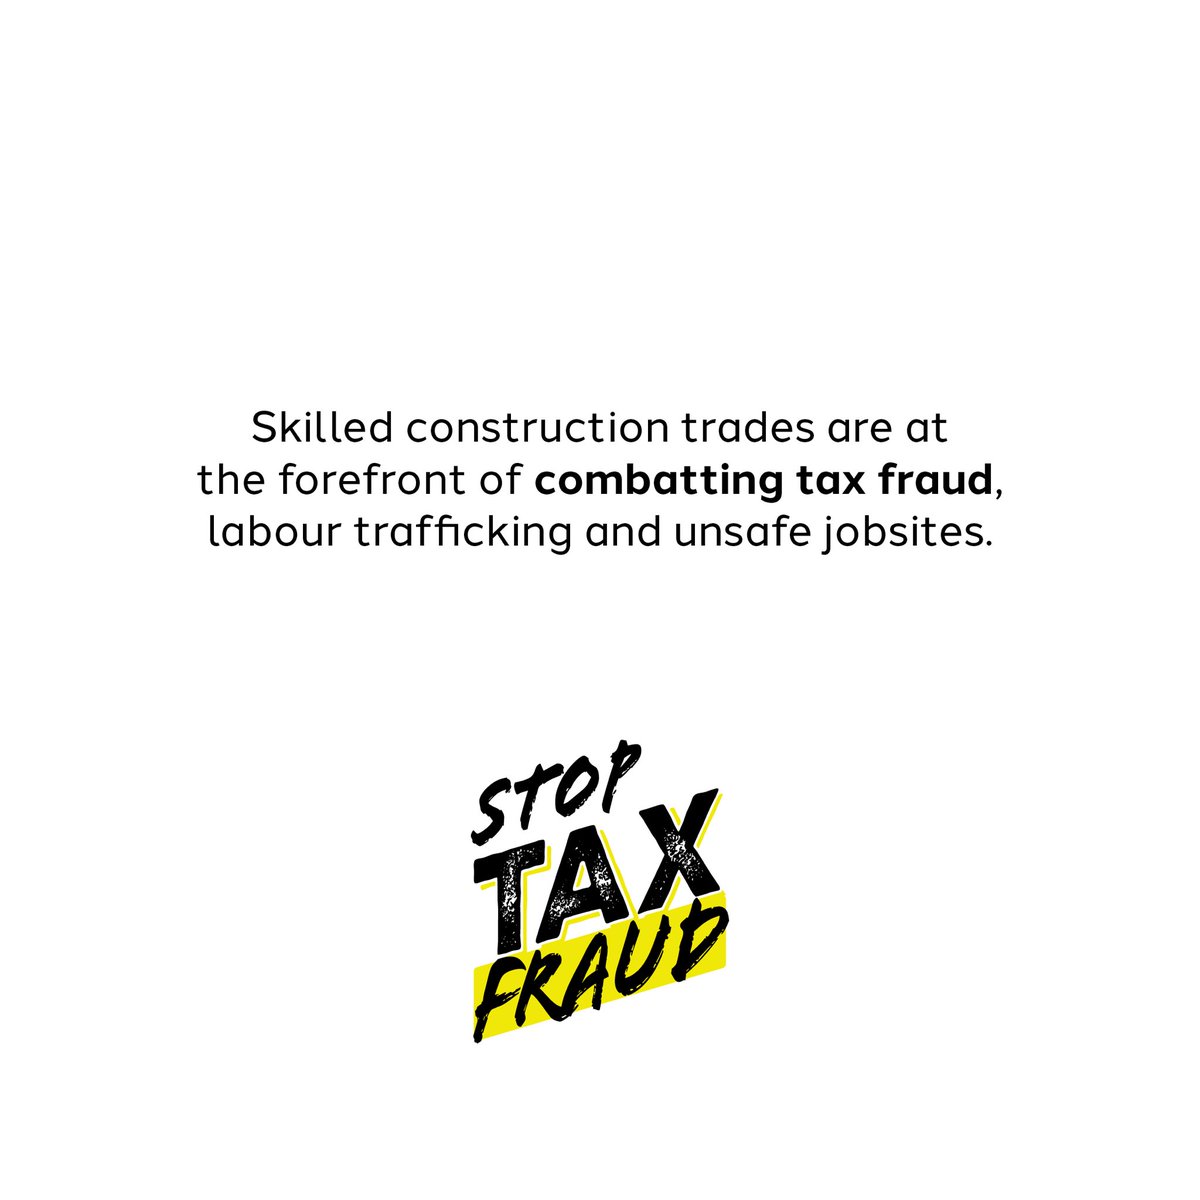 Shady contractors and labour brokers target vulnerable workers to exploit. Being part of a Union ensures fair representation and protection of your rights as a worker. It’s our job to stand up for you. #askyourselfwhy #TFDOA2024 #stoptaxfraud